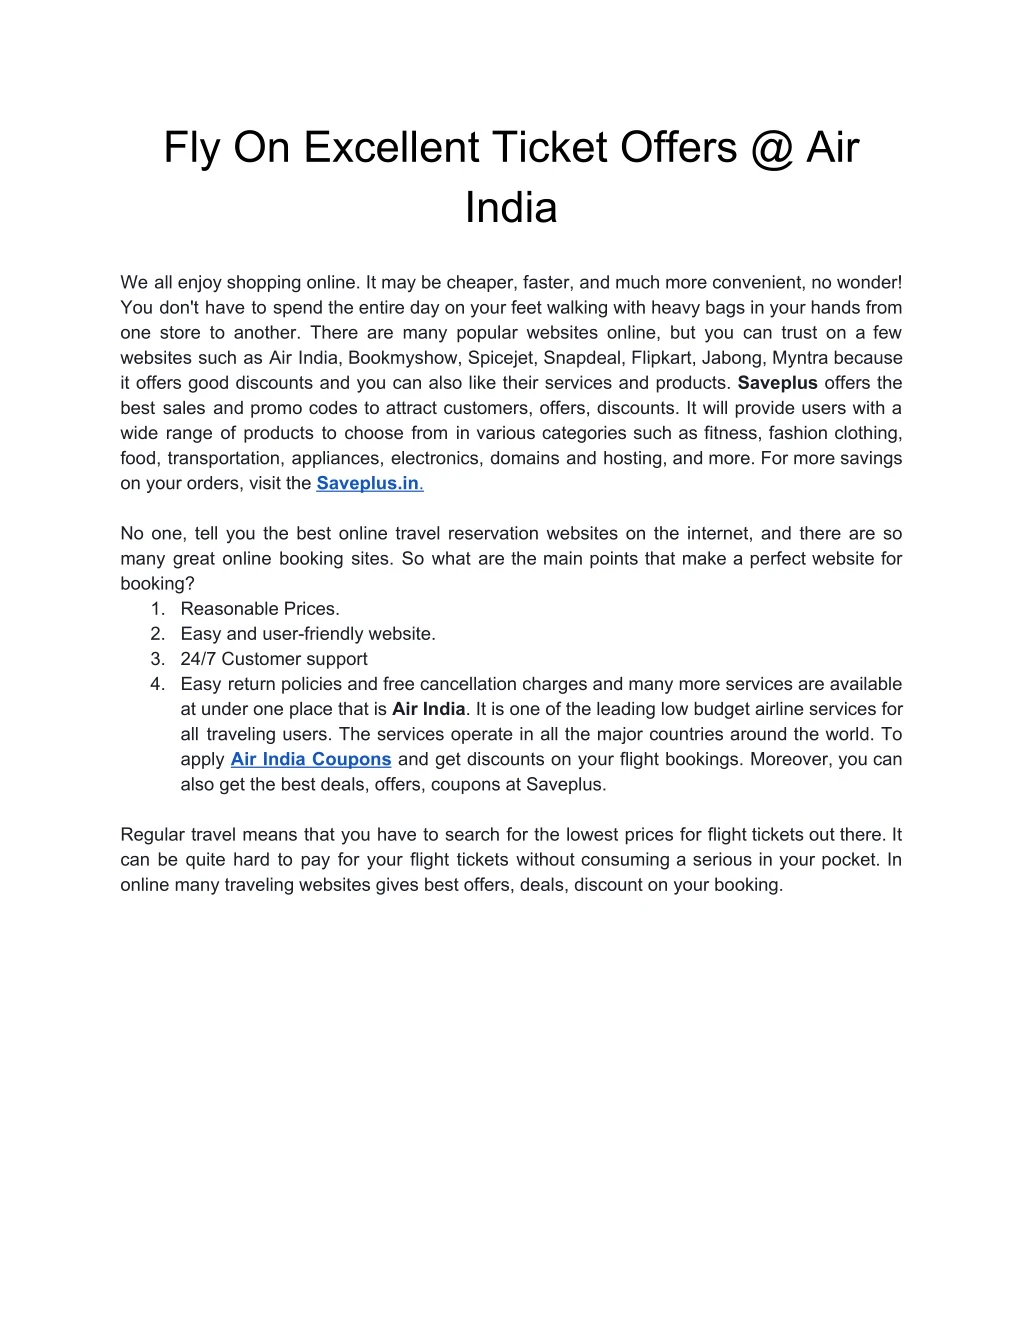 fly on excellent ticket offers @ air india